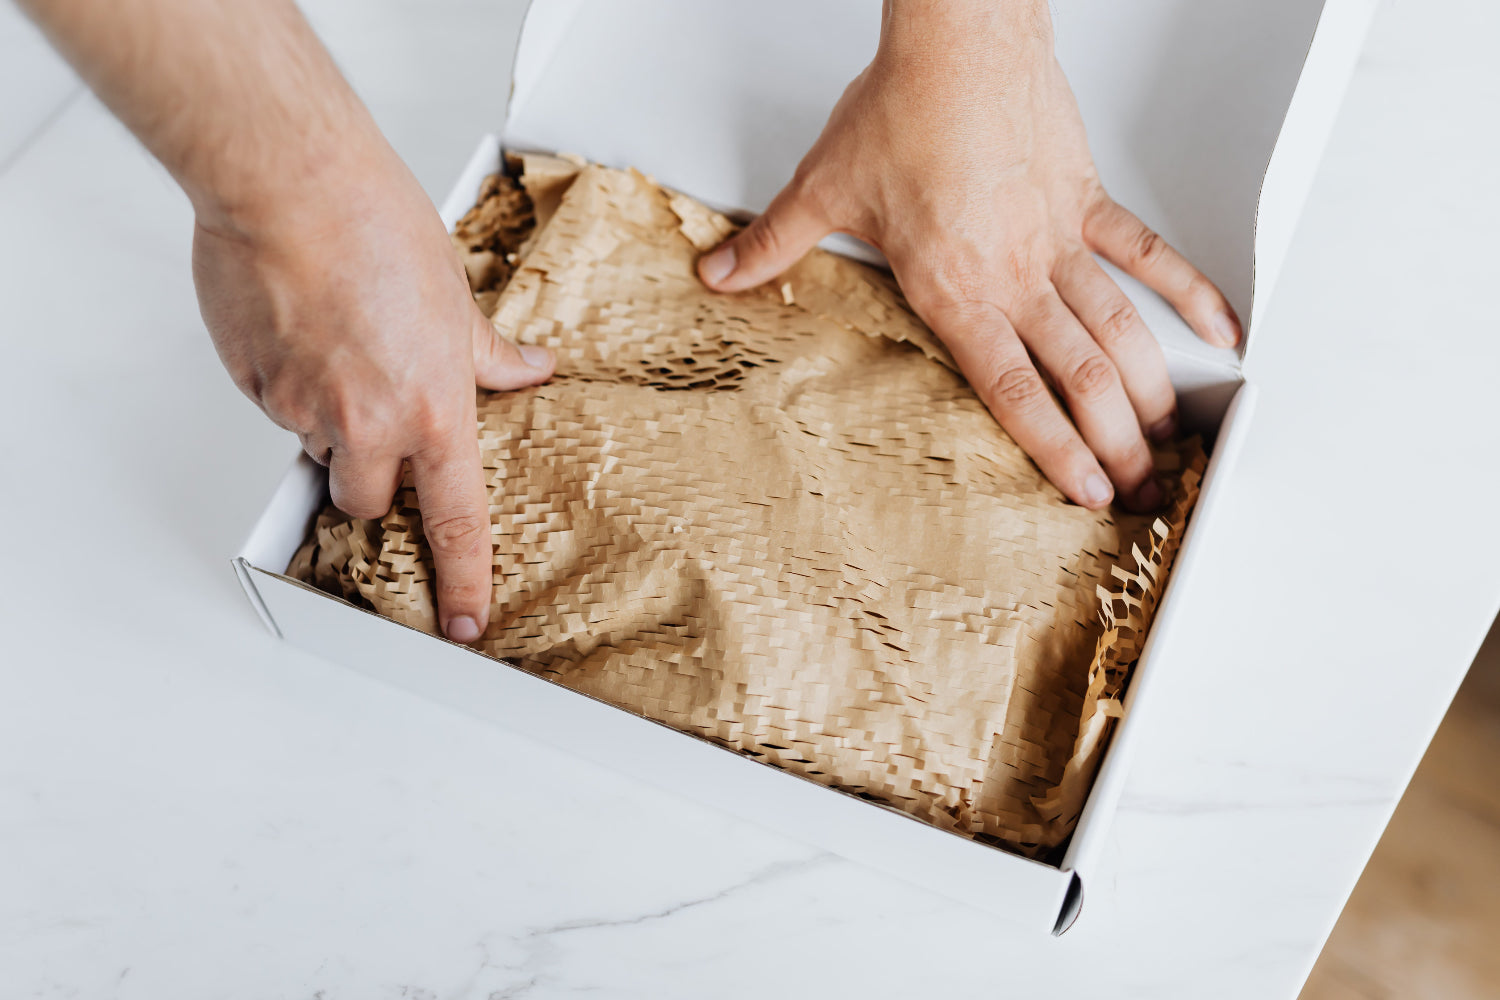 A person packs a box with packing material